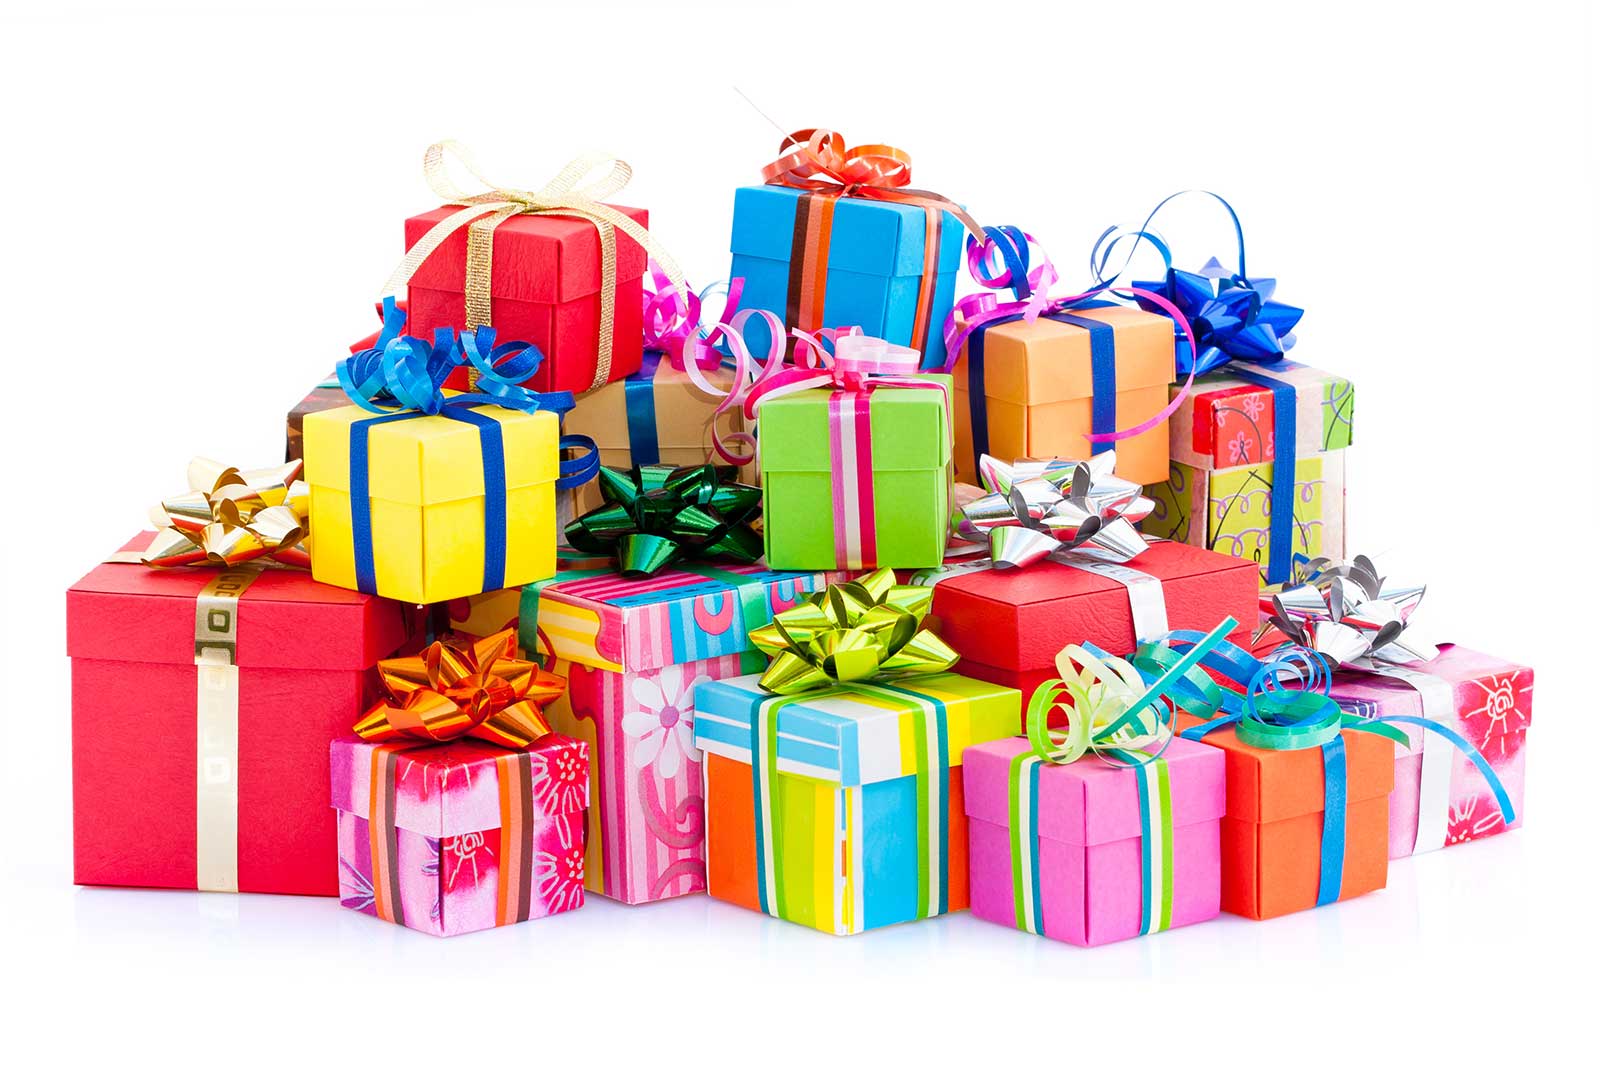 When Is It Appropriate To Give Gifts? Navy Information